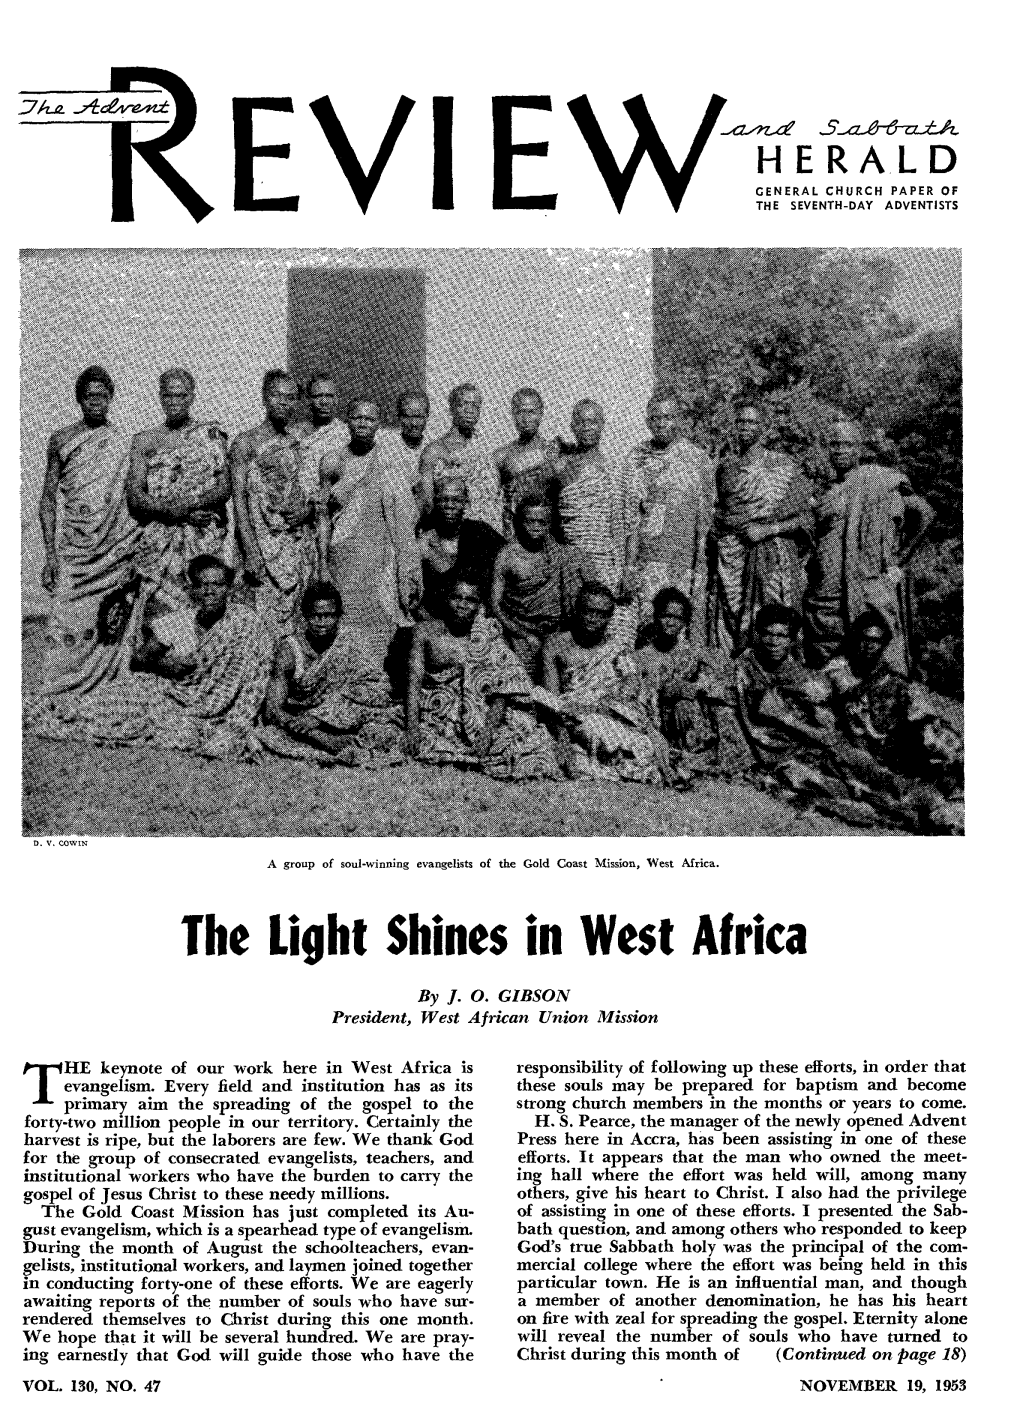 The Light Shines in West Africa